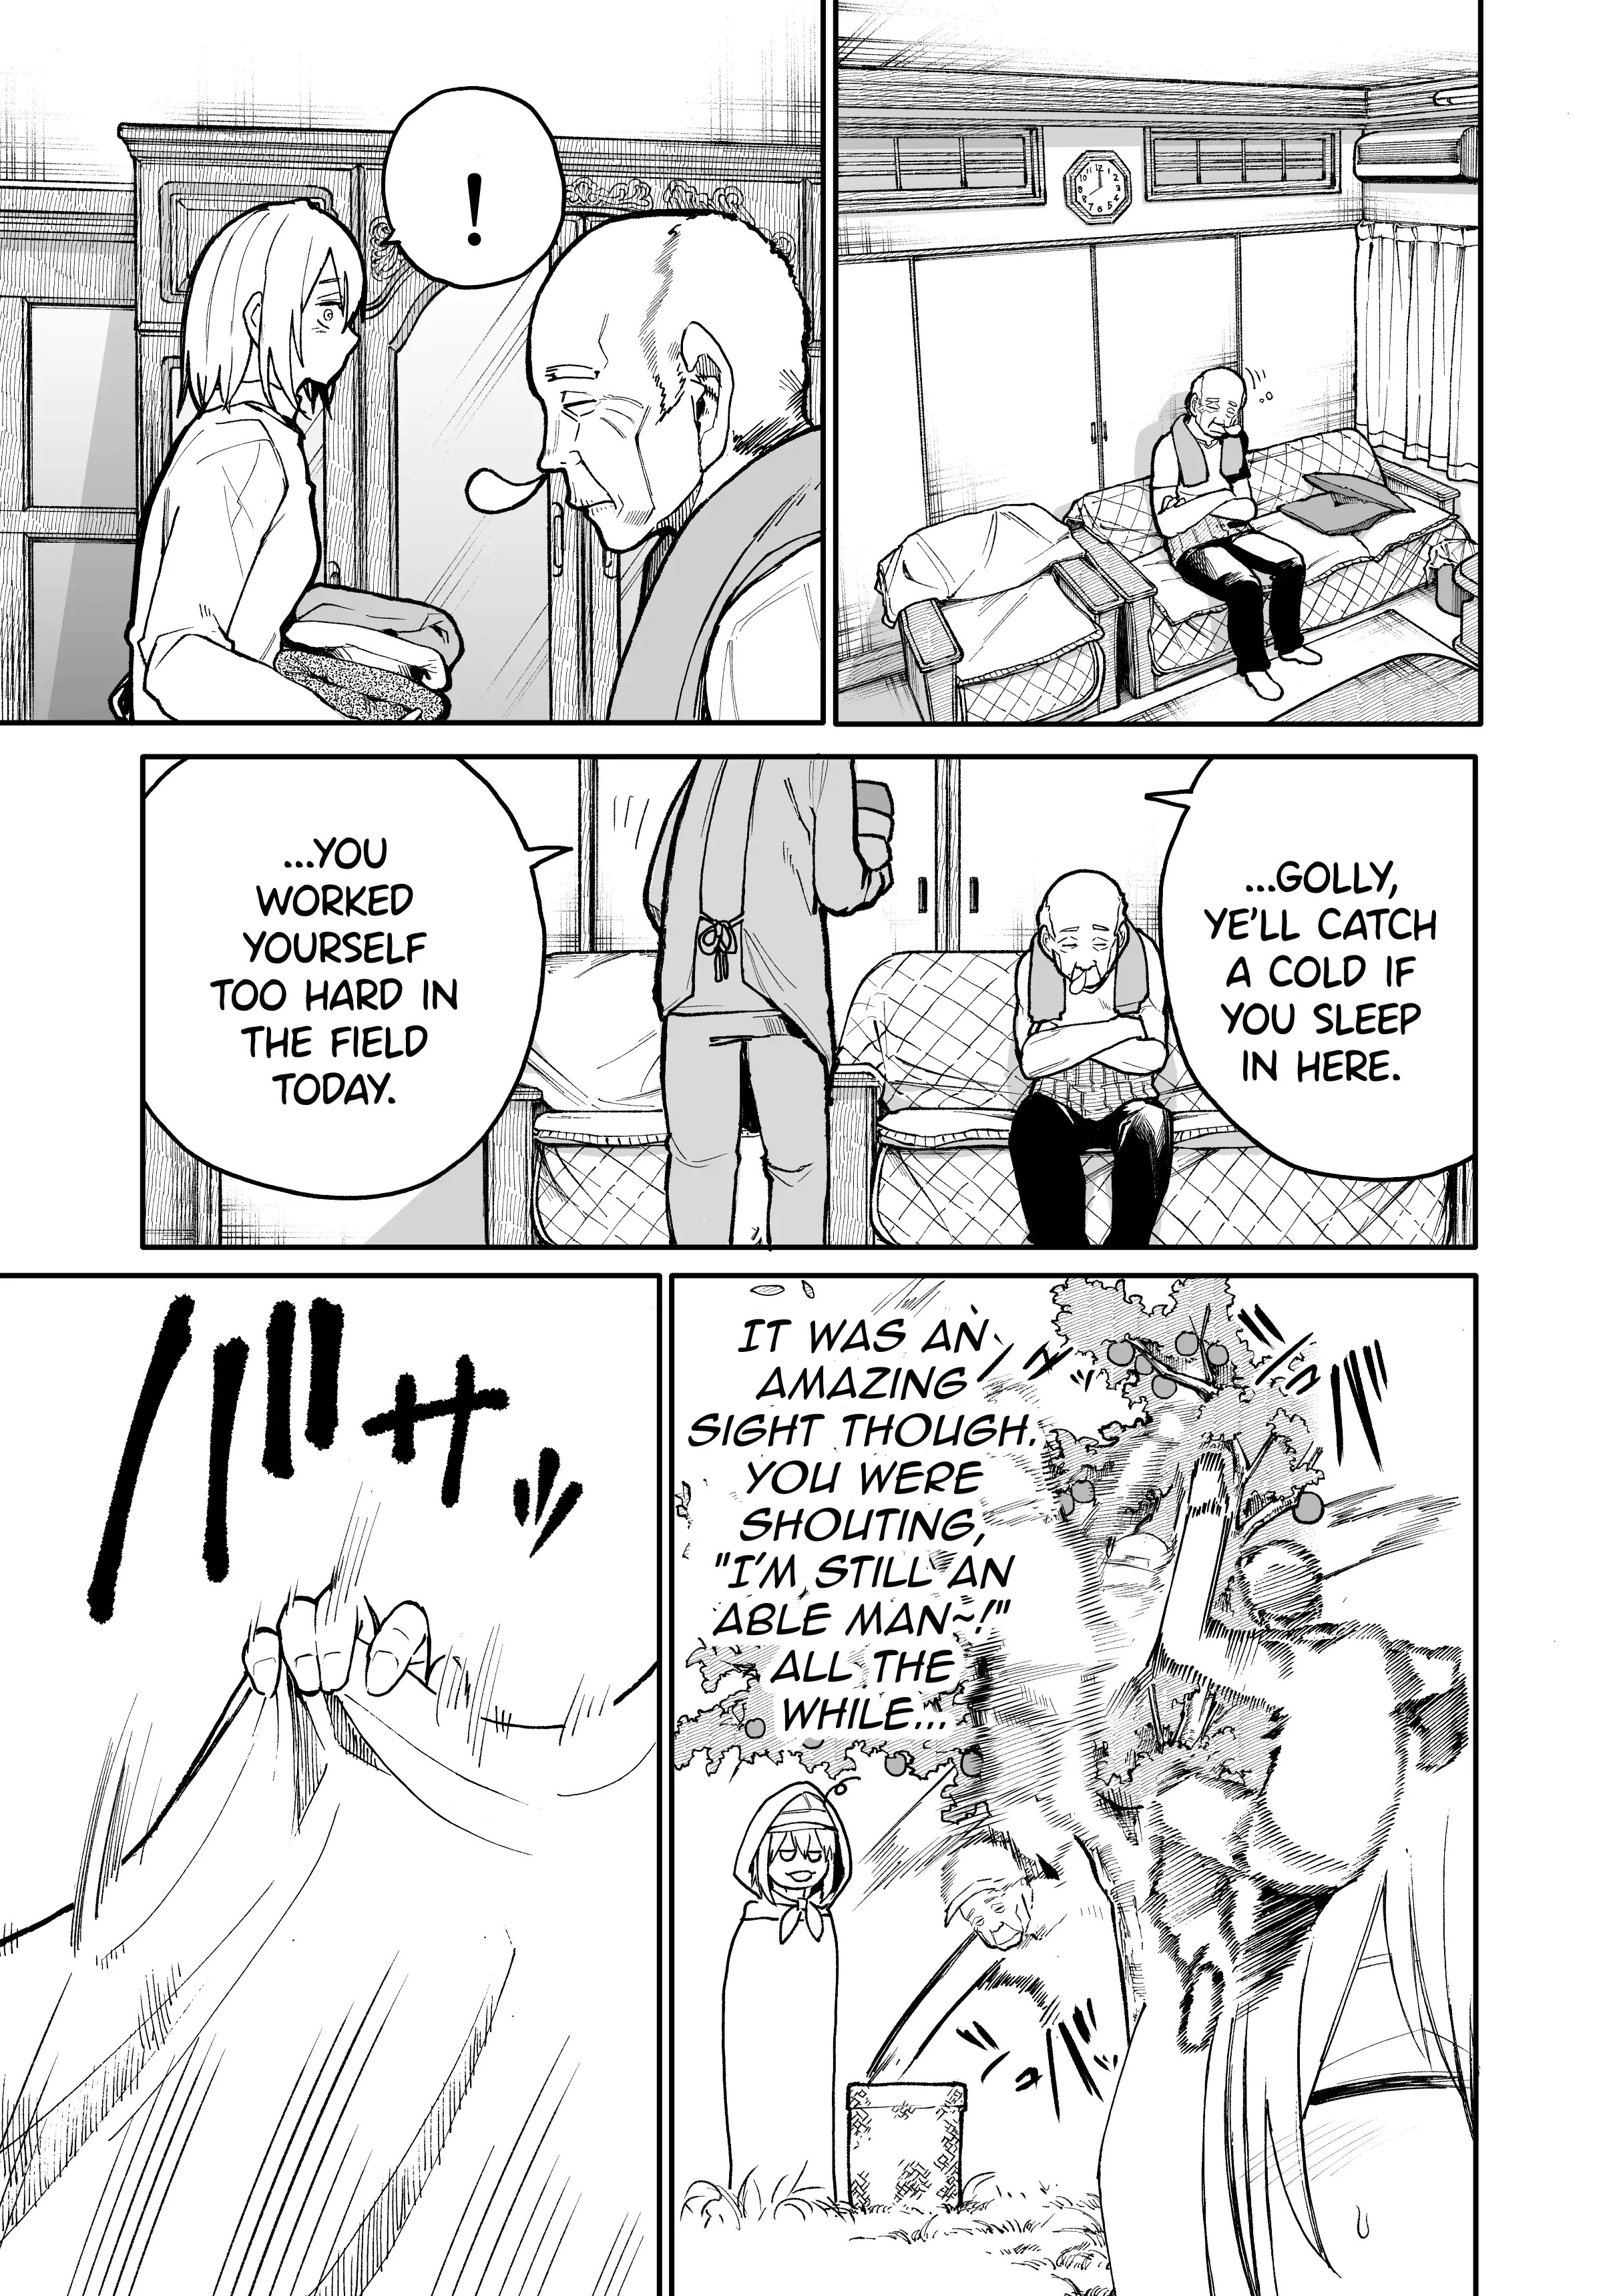 A Story About A Grandpa And Grandma Who Returned Back To Their Youth - 52 page 1-0513adbf